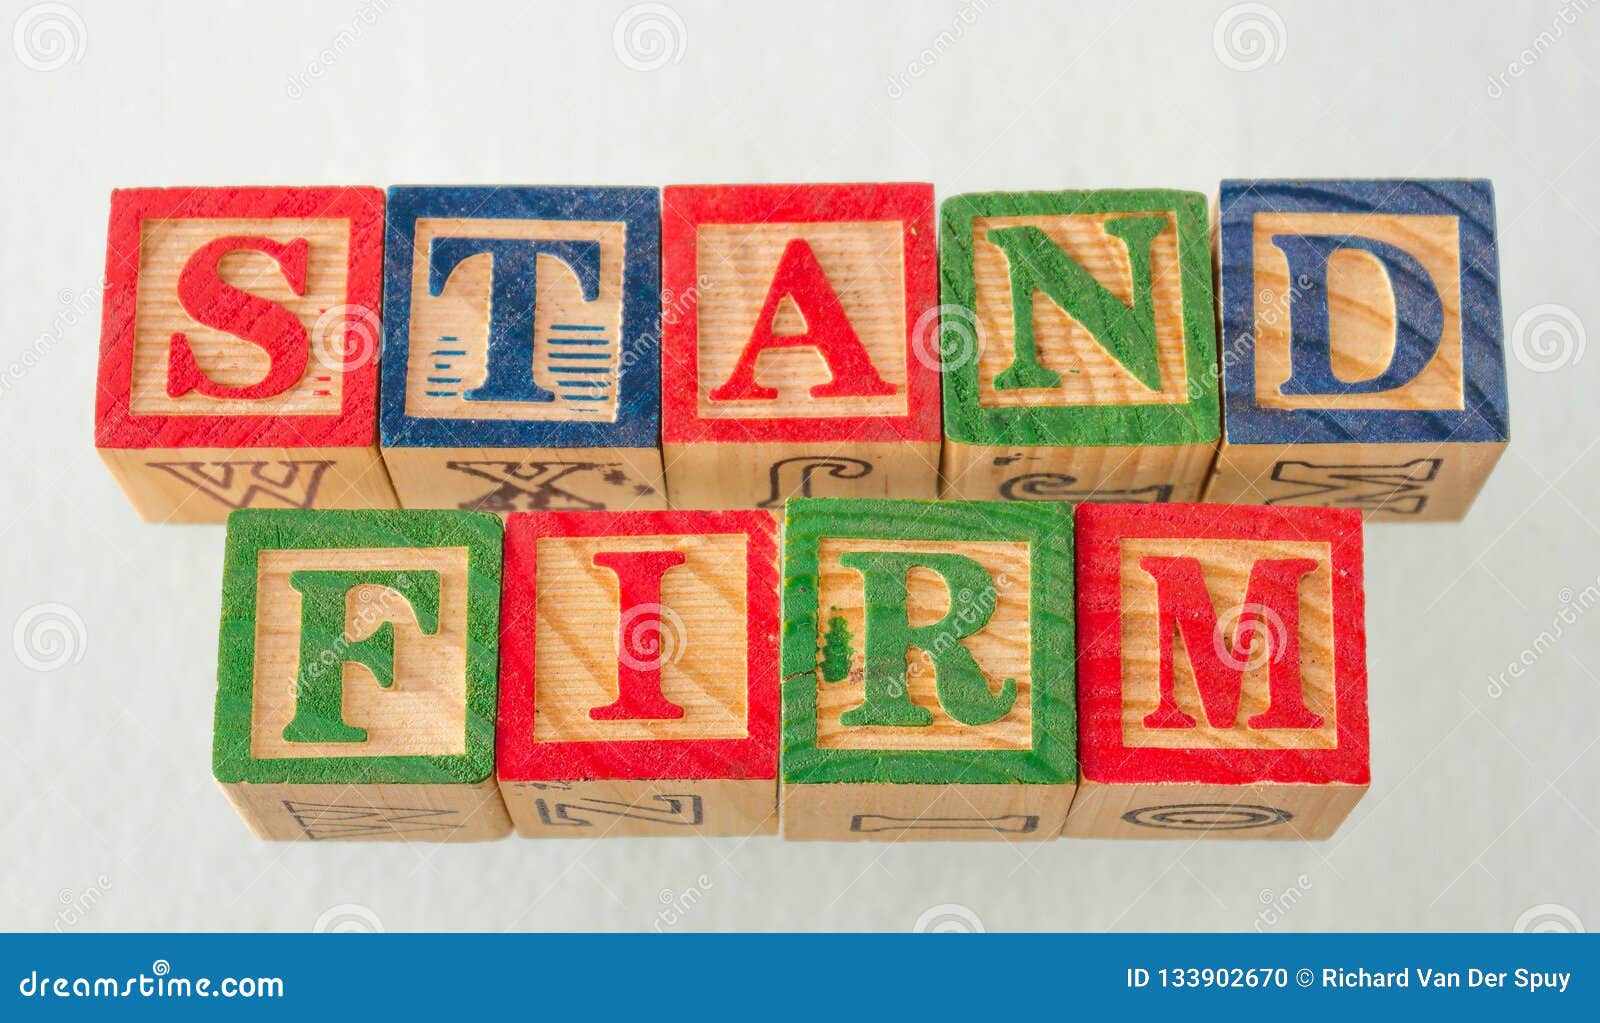 the term stand firm visually displayed